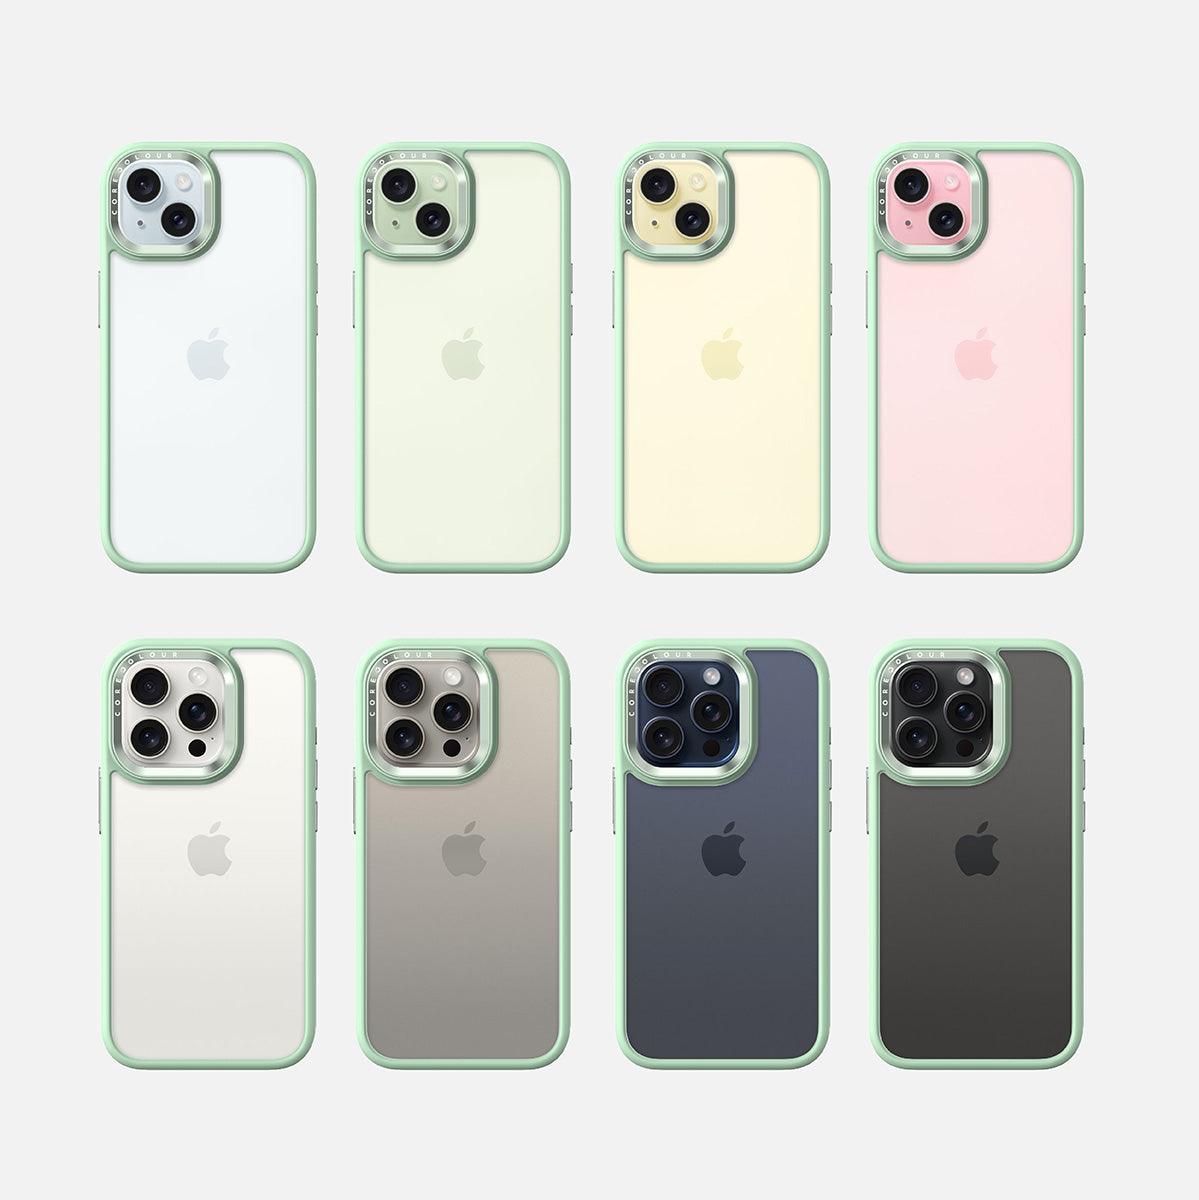 iPhone 12 Hint of Mint Clear Phone Case - CORECOLOUR